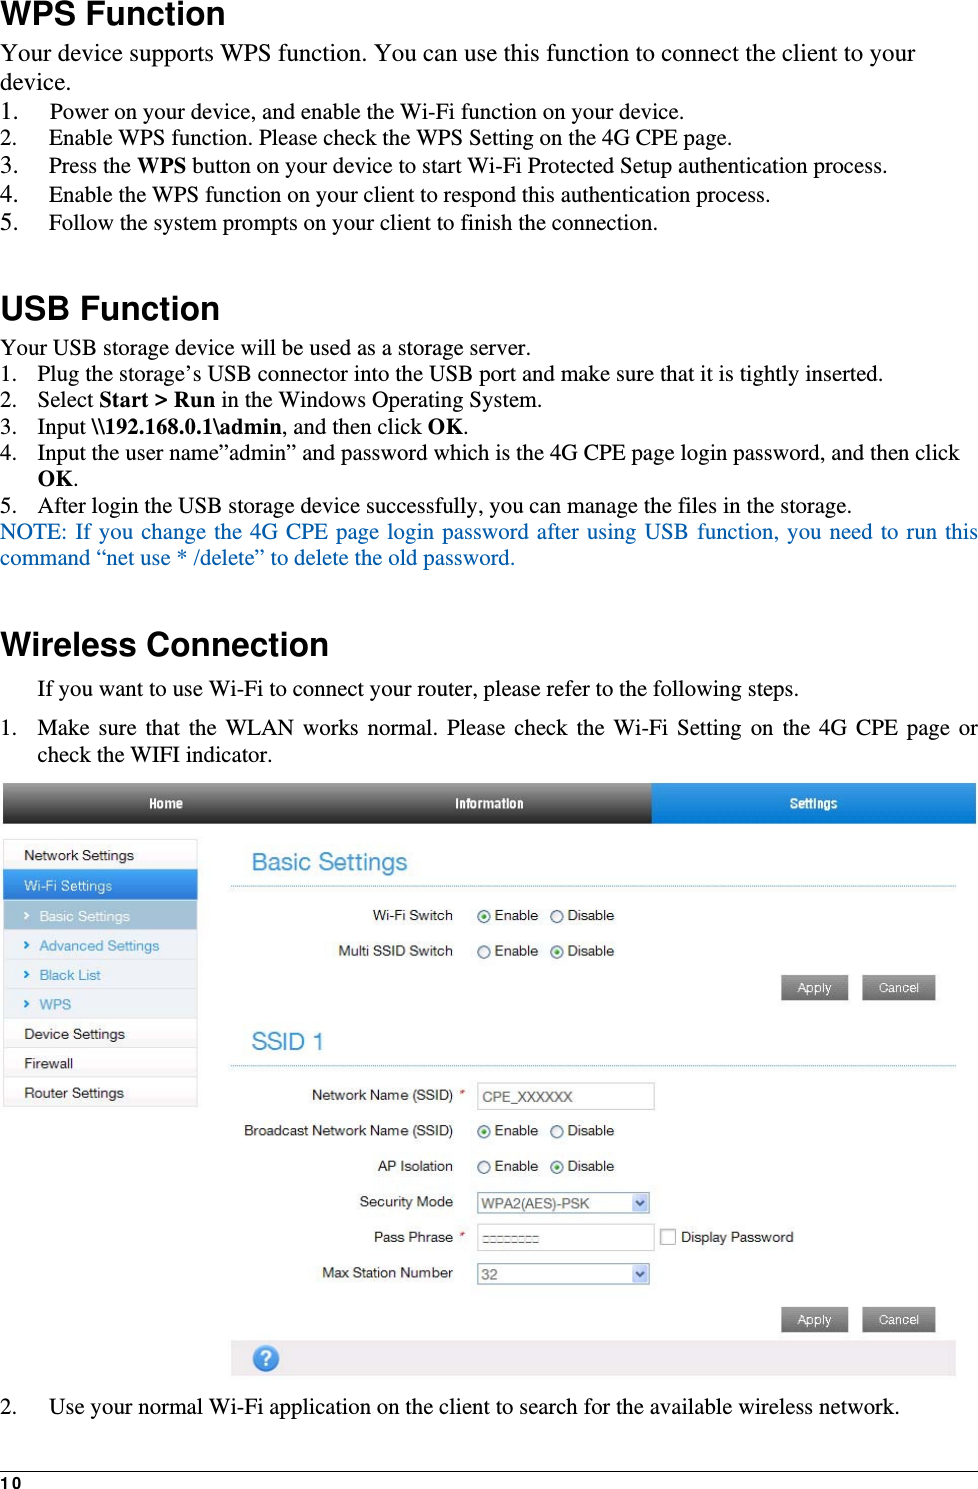 10  WPS Function Your device supports WPS function. You can use this function to connect the client to your device. 1.  Power on your device, and enable the Wi-Fi function on your device. 2.   Enable WPS function. Please check the WPS Setting on the 4G CPE page. 3.  Press the WPS button on your device to start Wi-Fi Protected Setup authentication process. 4.   Enable the WPS function on your client to respond this authentication process. 5.   Follow the system prompts on your client to finish the connection.  USB Function Your USB storage device will be used as a storage server. 1. Plug the storage’s USB connector into the USB port and make sure that it is tightly inserted.   2. Select Start &gt; Run in the Windows Operating System.   3. Input \\192.168.0.1\admin, and then click OK. 4. Input the user name”admin” and password which is the 4G CPE page login password, and then click OK.  5. After login the USB storage device successfully, you can manage the files in the storage. NOTE: If you change the 4G CPE page login password after using USB function, you need to run this command “net use * /delete” to delete the old password.    Wireless Connection If you want to use Wi-Fi to connect your router, please refer to the following steps. 1. Make sure that the WLAN works normal. Please check the Wi-Fi Setting on the 4G CPE page or check the WIFI indicator.  2.   Use your normal Wi-Fi application on the client to search for the available wireless network. 